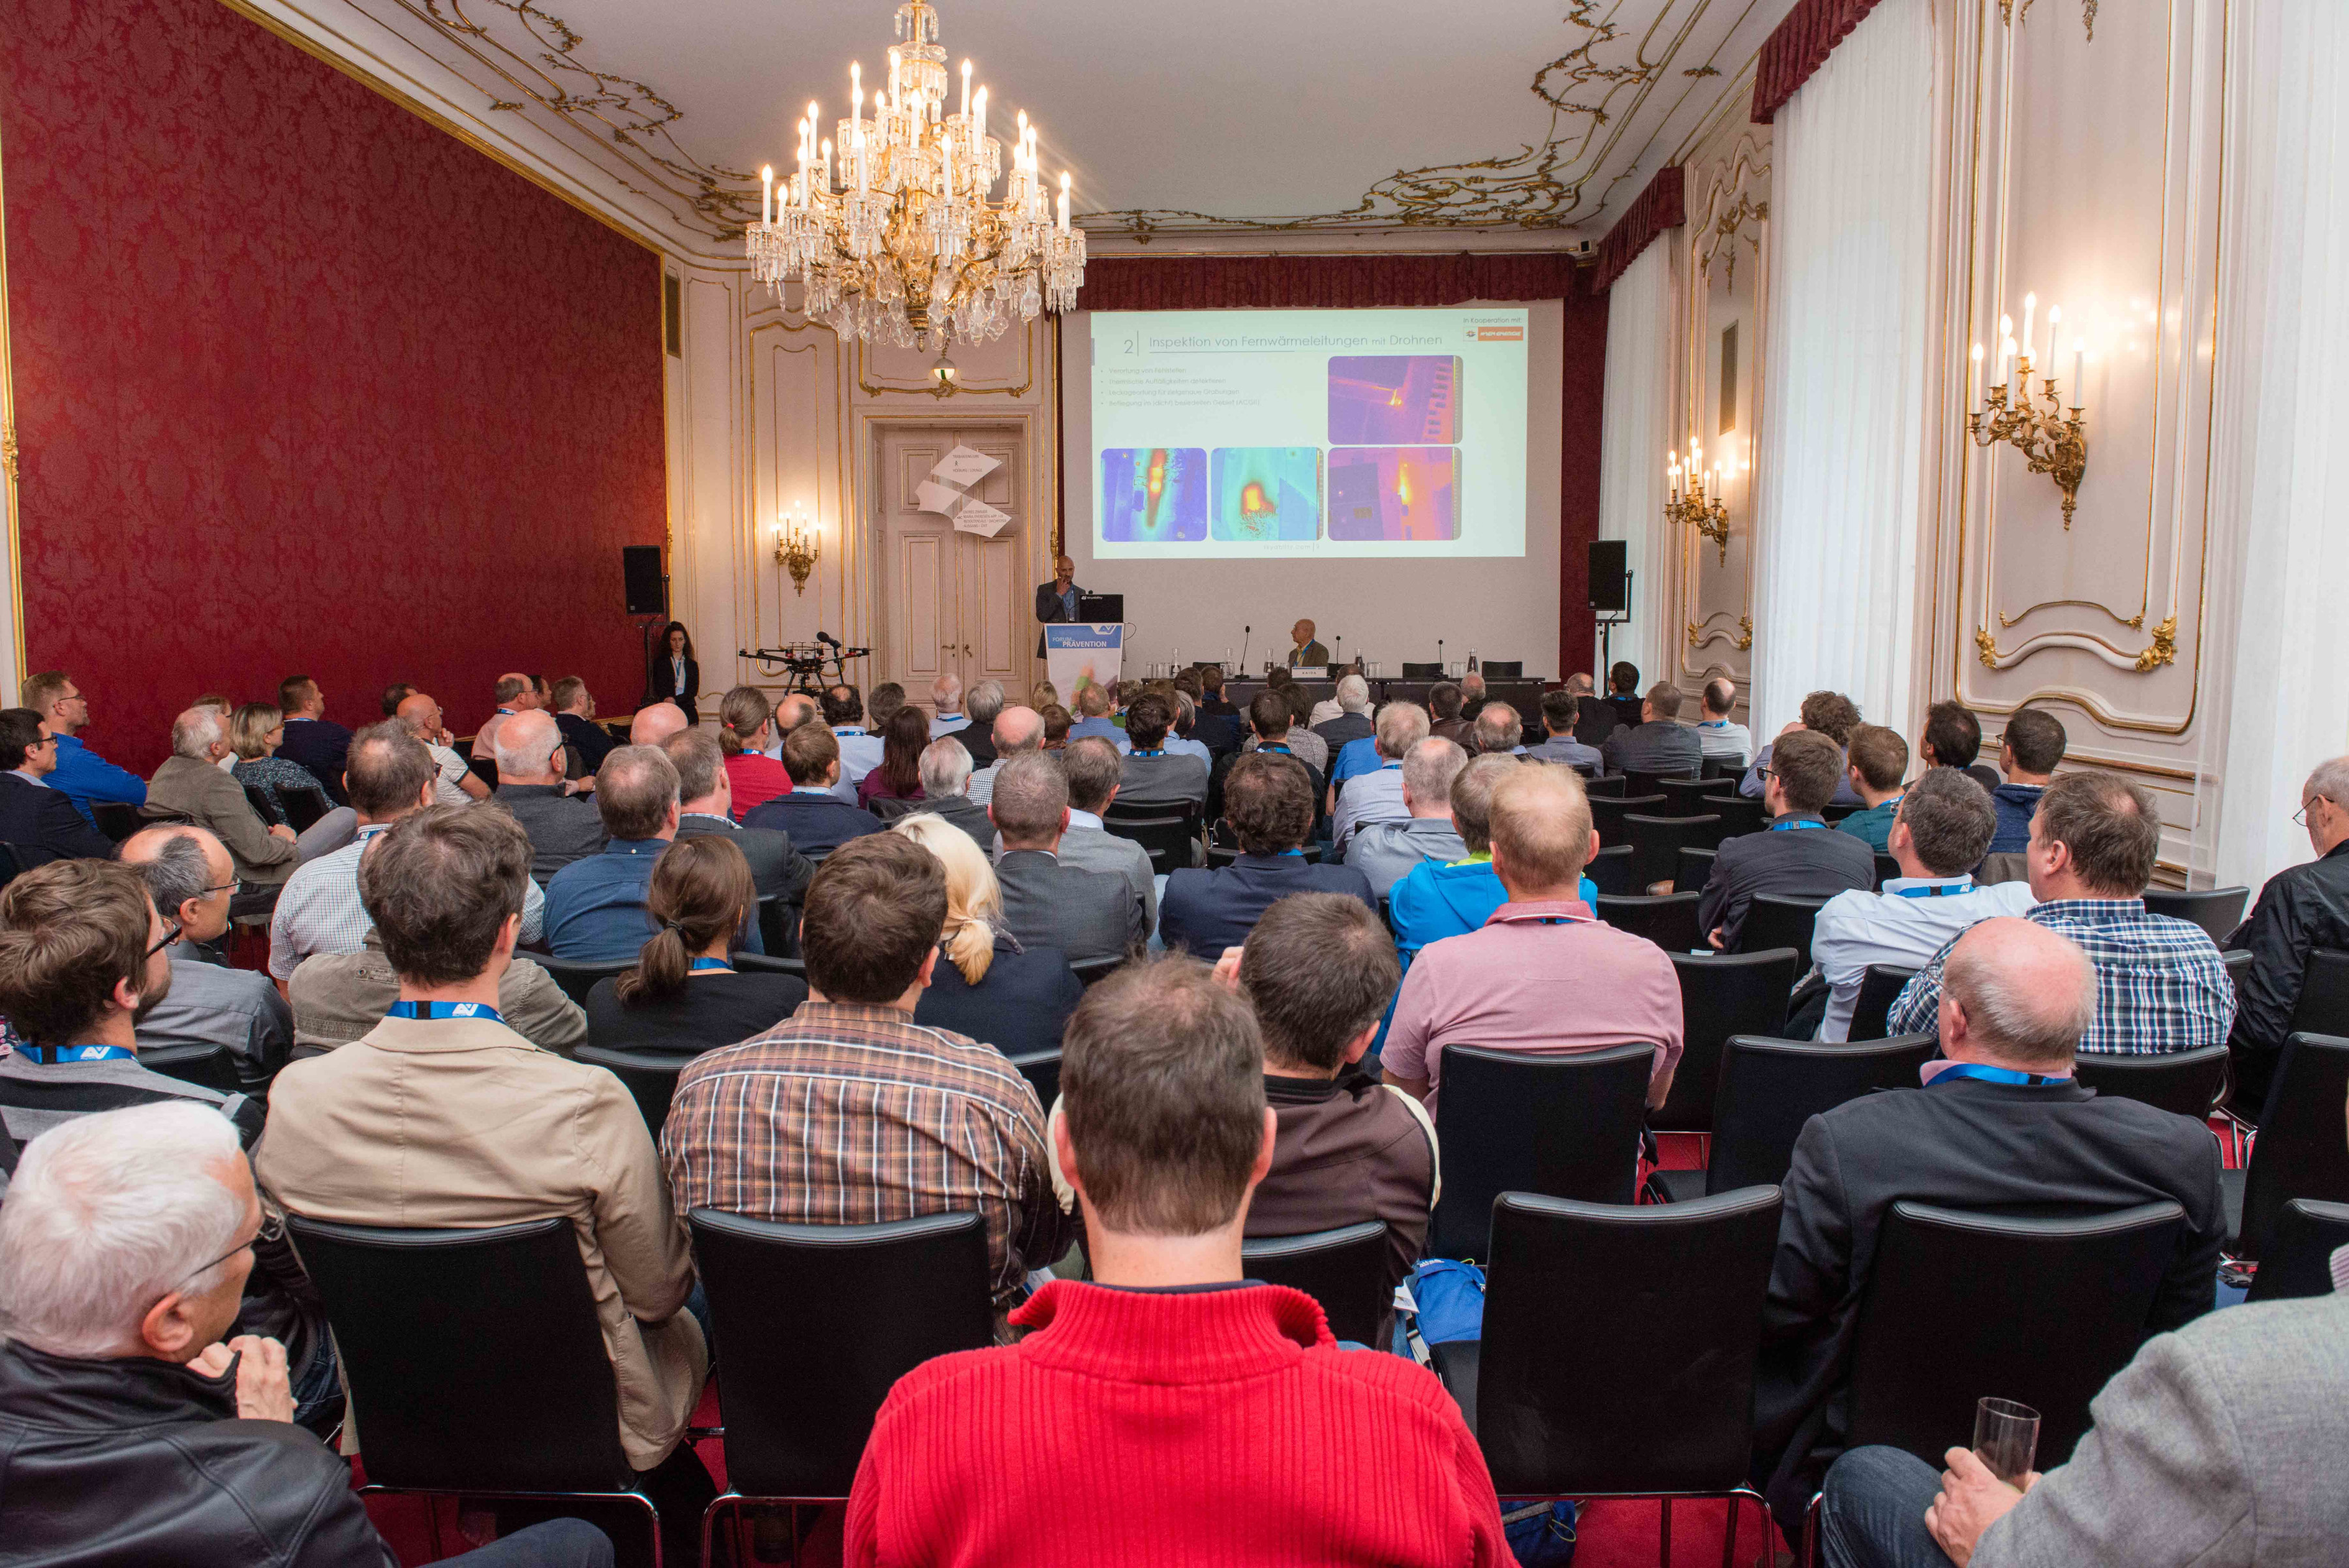 RiskMan project introduced at Forum Prävention 2019 in Vienna